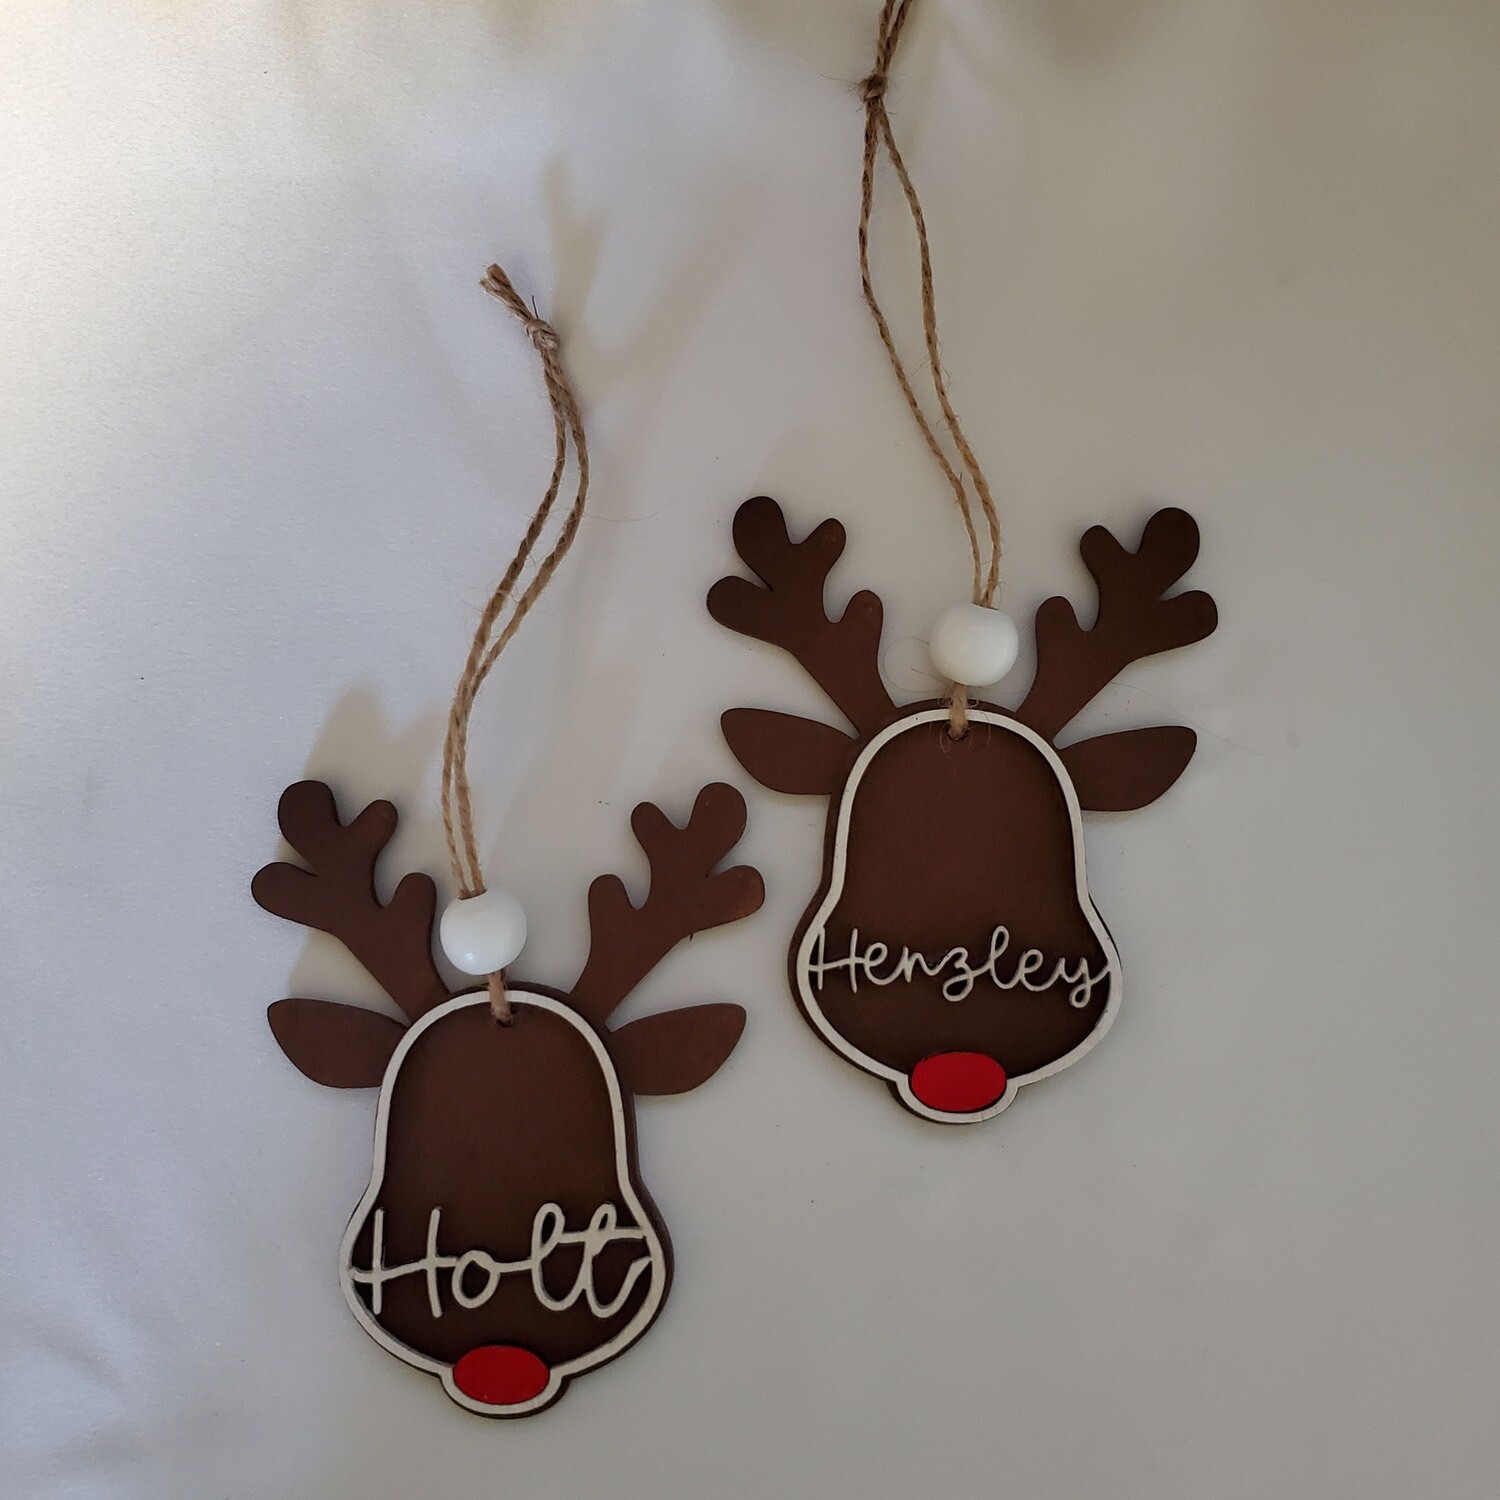 Personalized reindeer ornament